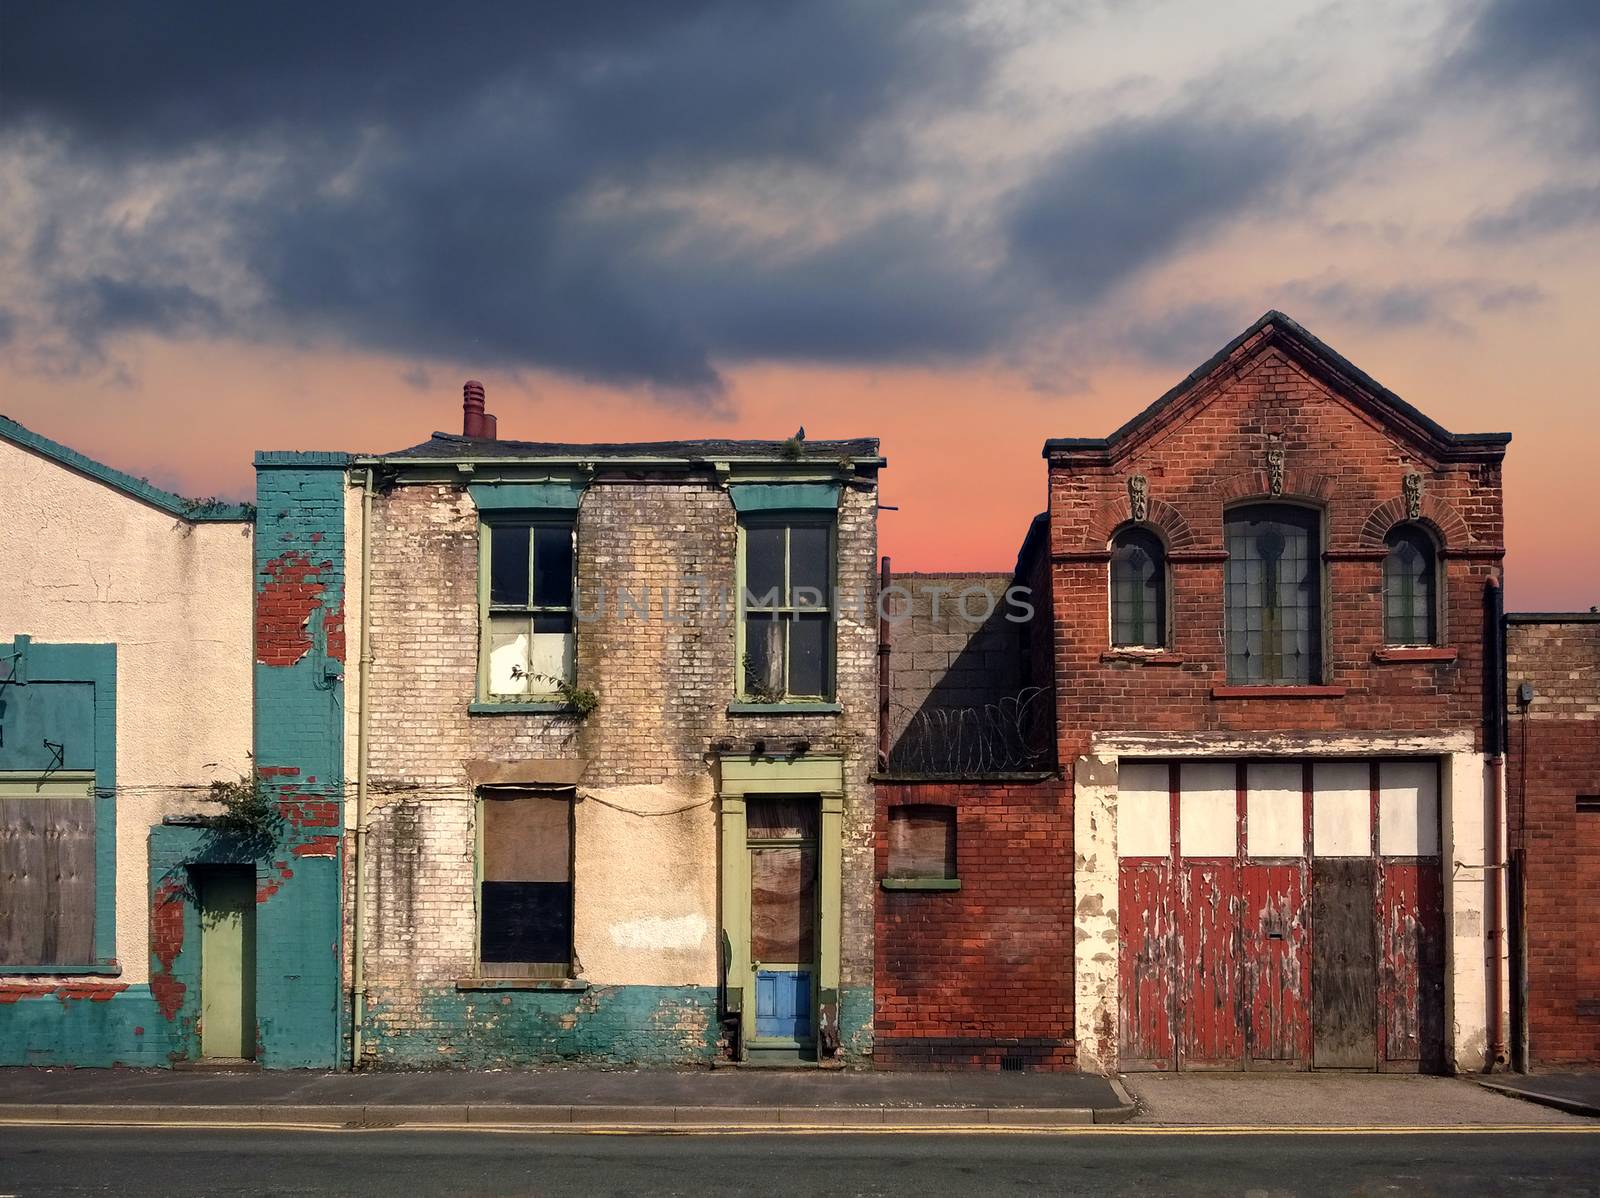 a deserted street of old abandoned ruined houses with bright peeling paint and crumbling brickwork in evening sunlight against a bright cloudy sunset sky by philopenshaw